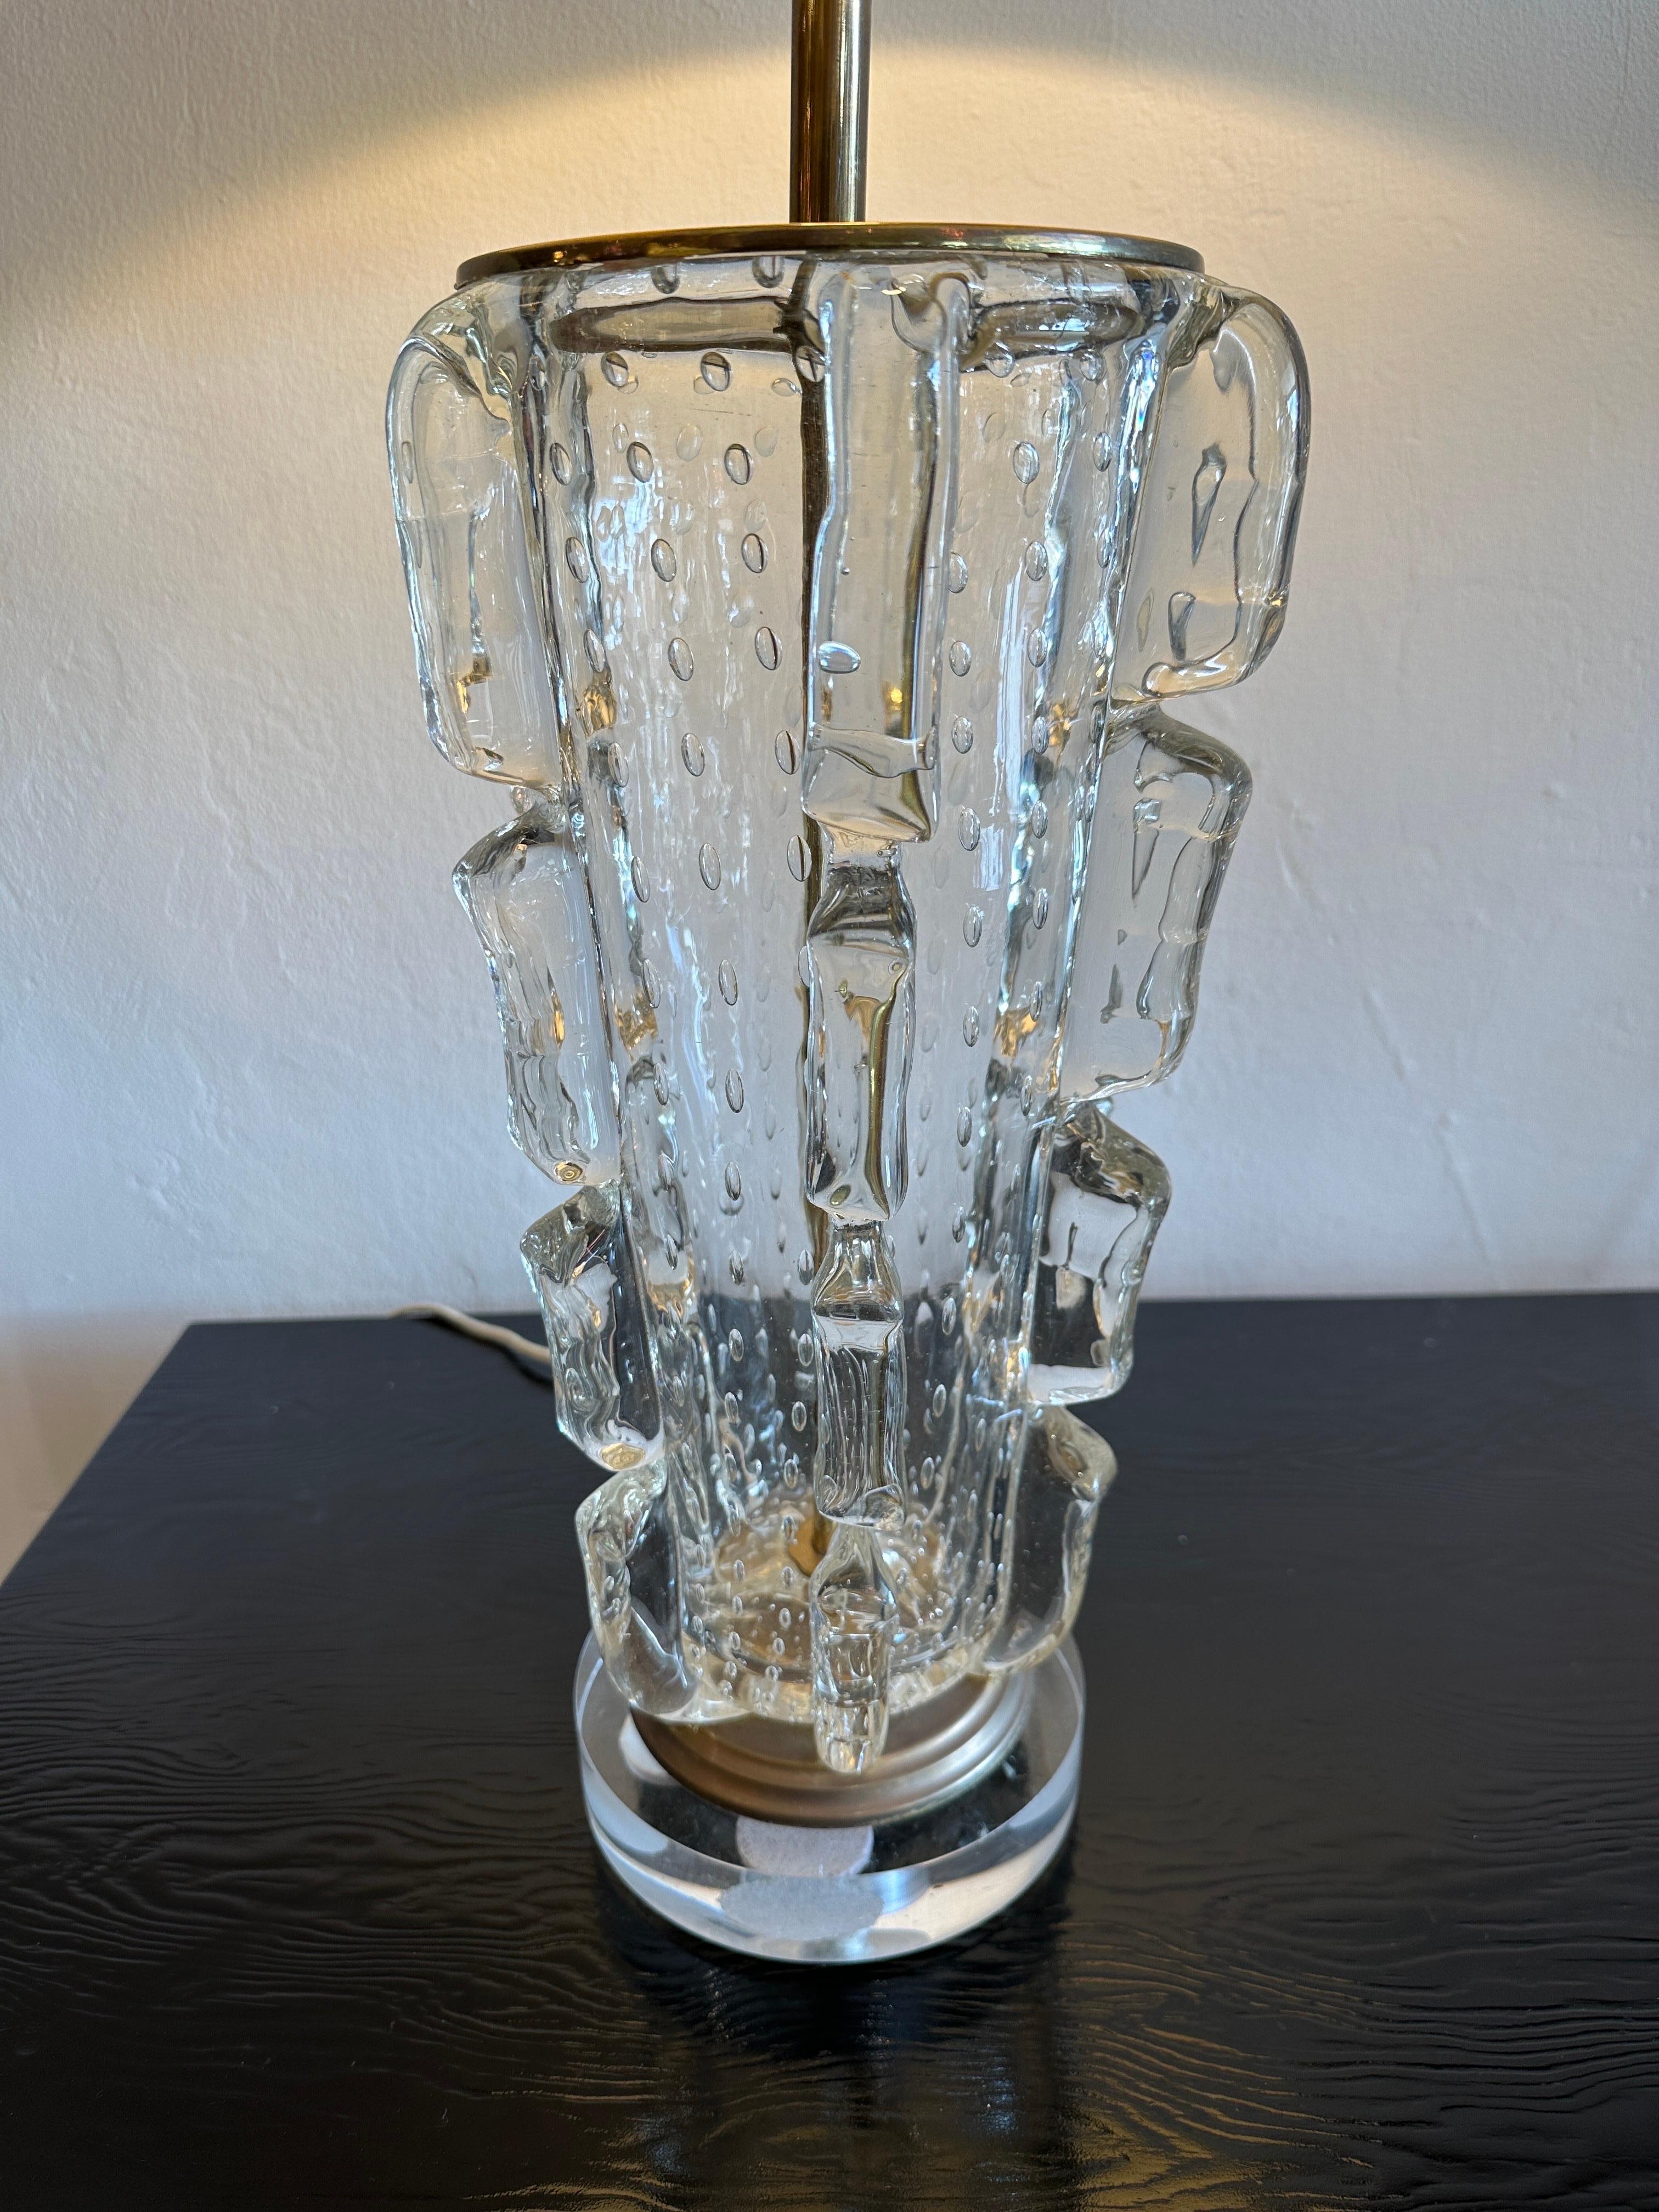 Vintage 1940's Barovier Bubbled Murano Glass Table Lamp In Good Condition For Sale In East Hampton, NY